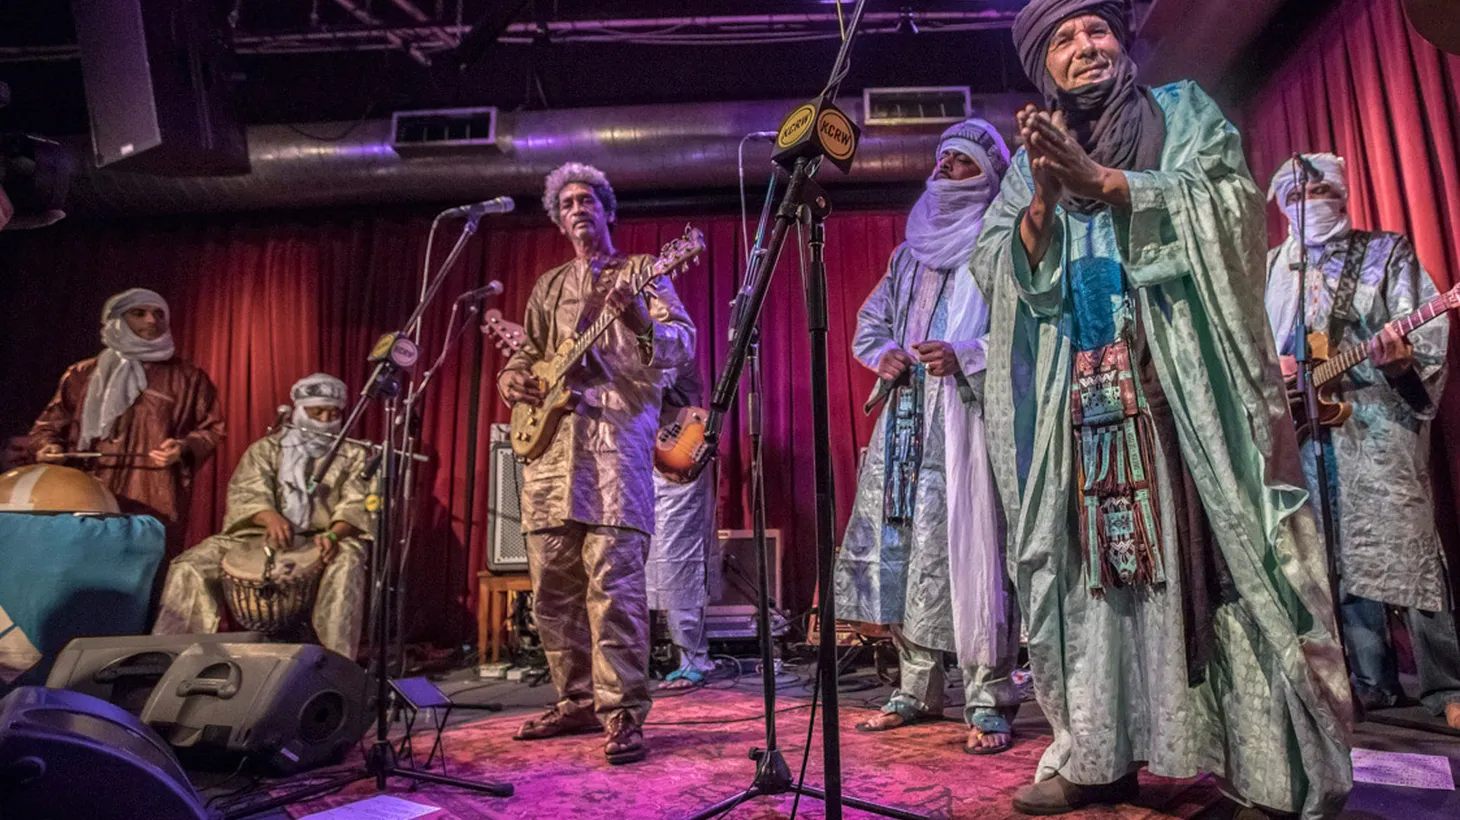 Nomadic musicians from the Saharan region of northwest Africa, the members of Tinariwen have been sharing their particular brand of desert blues since 1979.